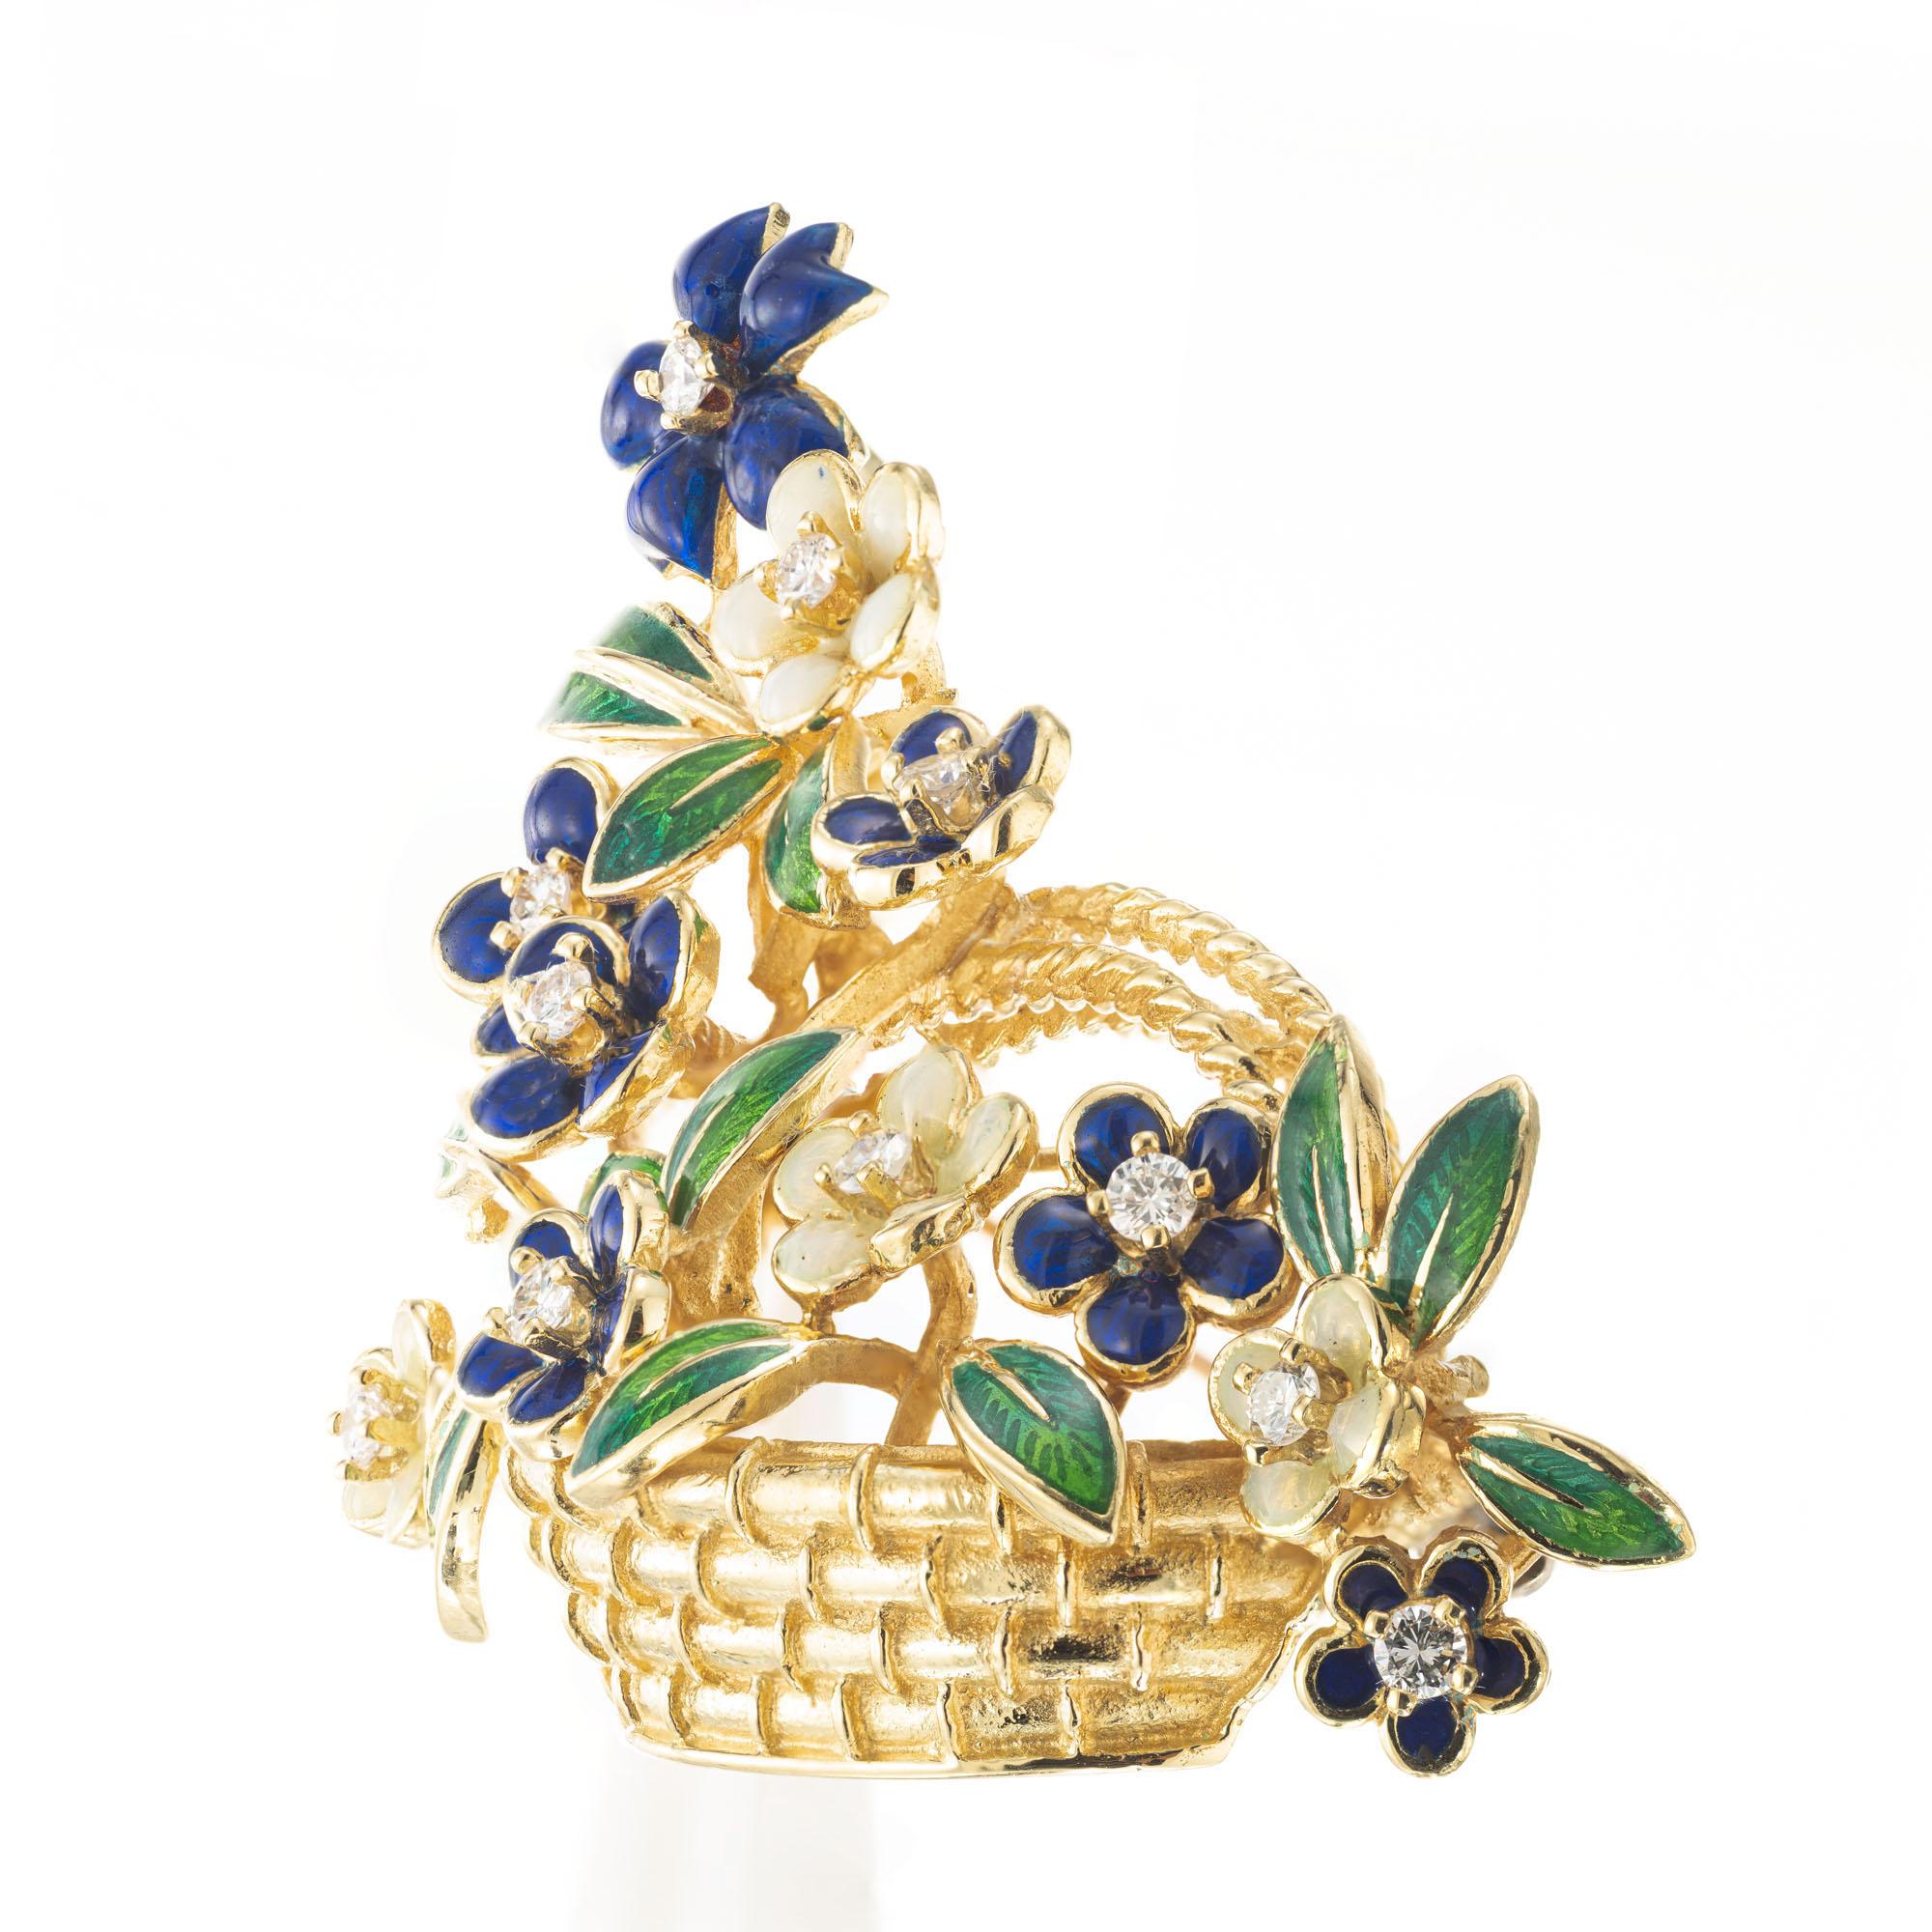 Vintage 1960's Tiffany & Co 18k yellow gold basket flower brooch with blue and green enamel and 11 round accent diamonds. 

11 round brilliant cut diamonds, F-G VS approx. .22cts
Blue green and white enamel
18k yellow gold
Stamped: 18k
Hallmark: